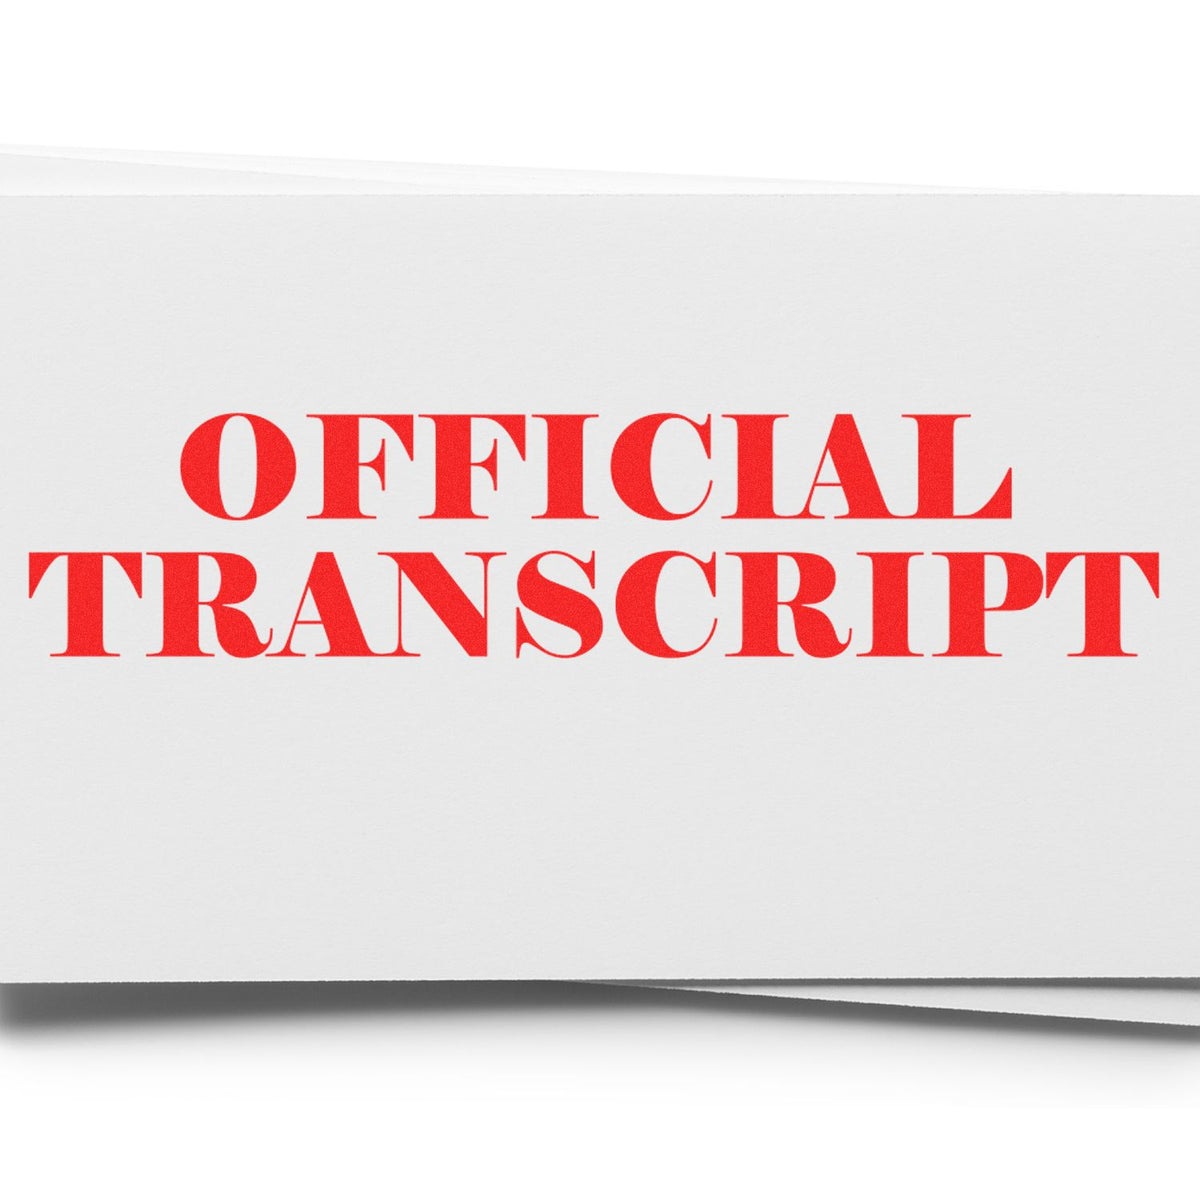 Large Official Transcript Rubber Stamp In Use Photo